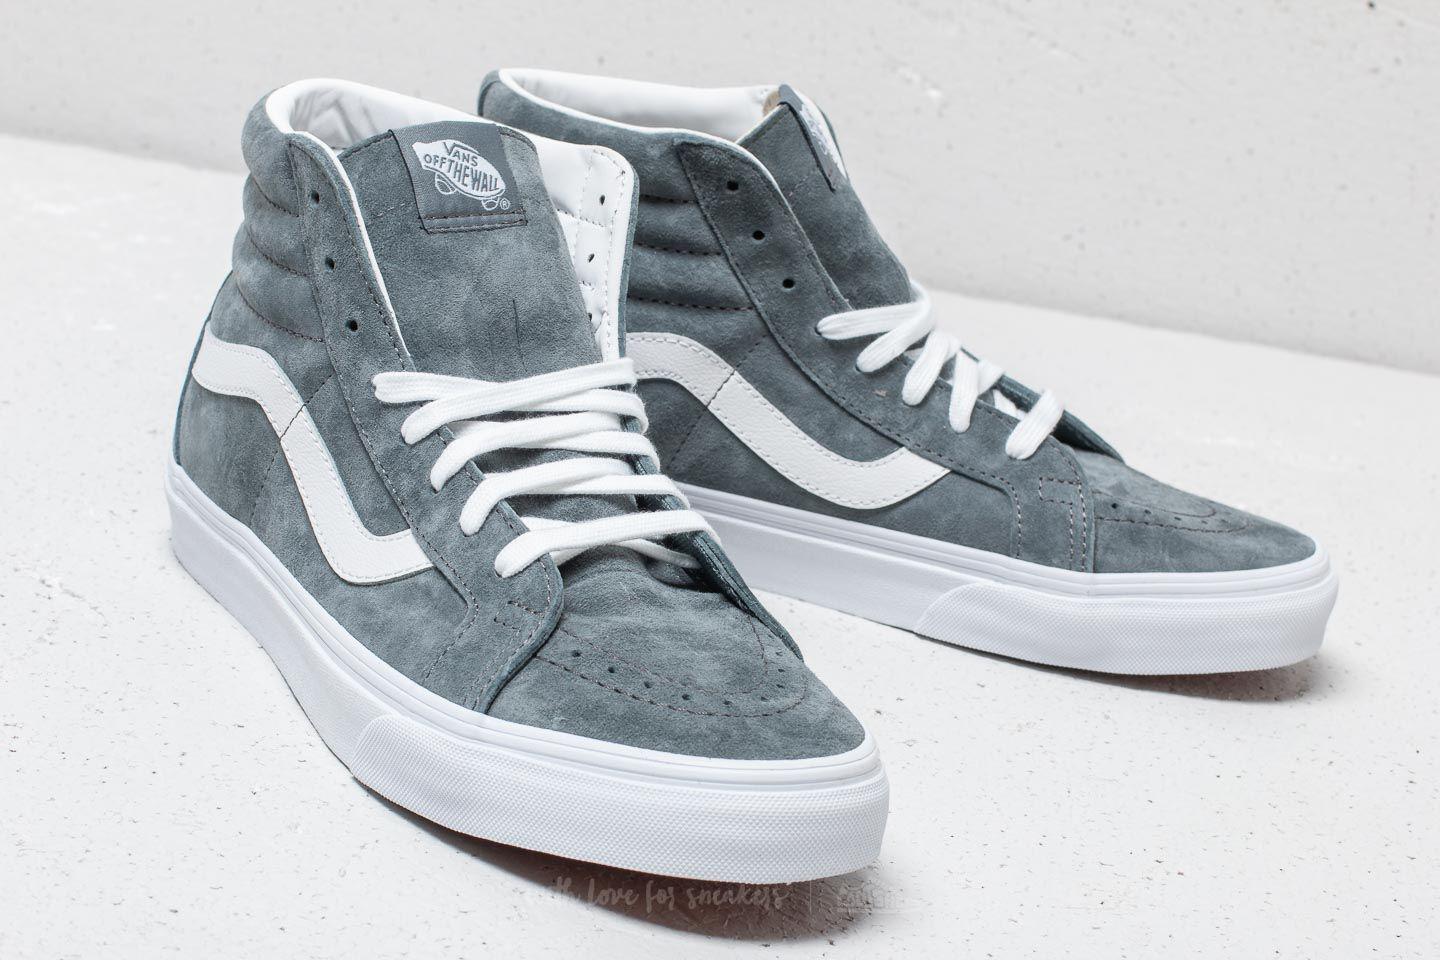 Get - vans sk8 hi stormy weather - OFF 75% - Getting free delivery on the  things you buy every day - www.armaosgb.com.tr